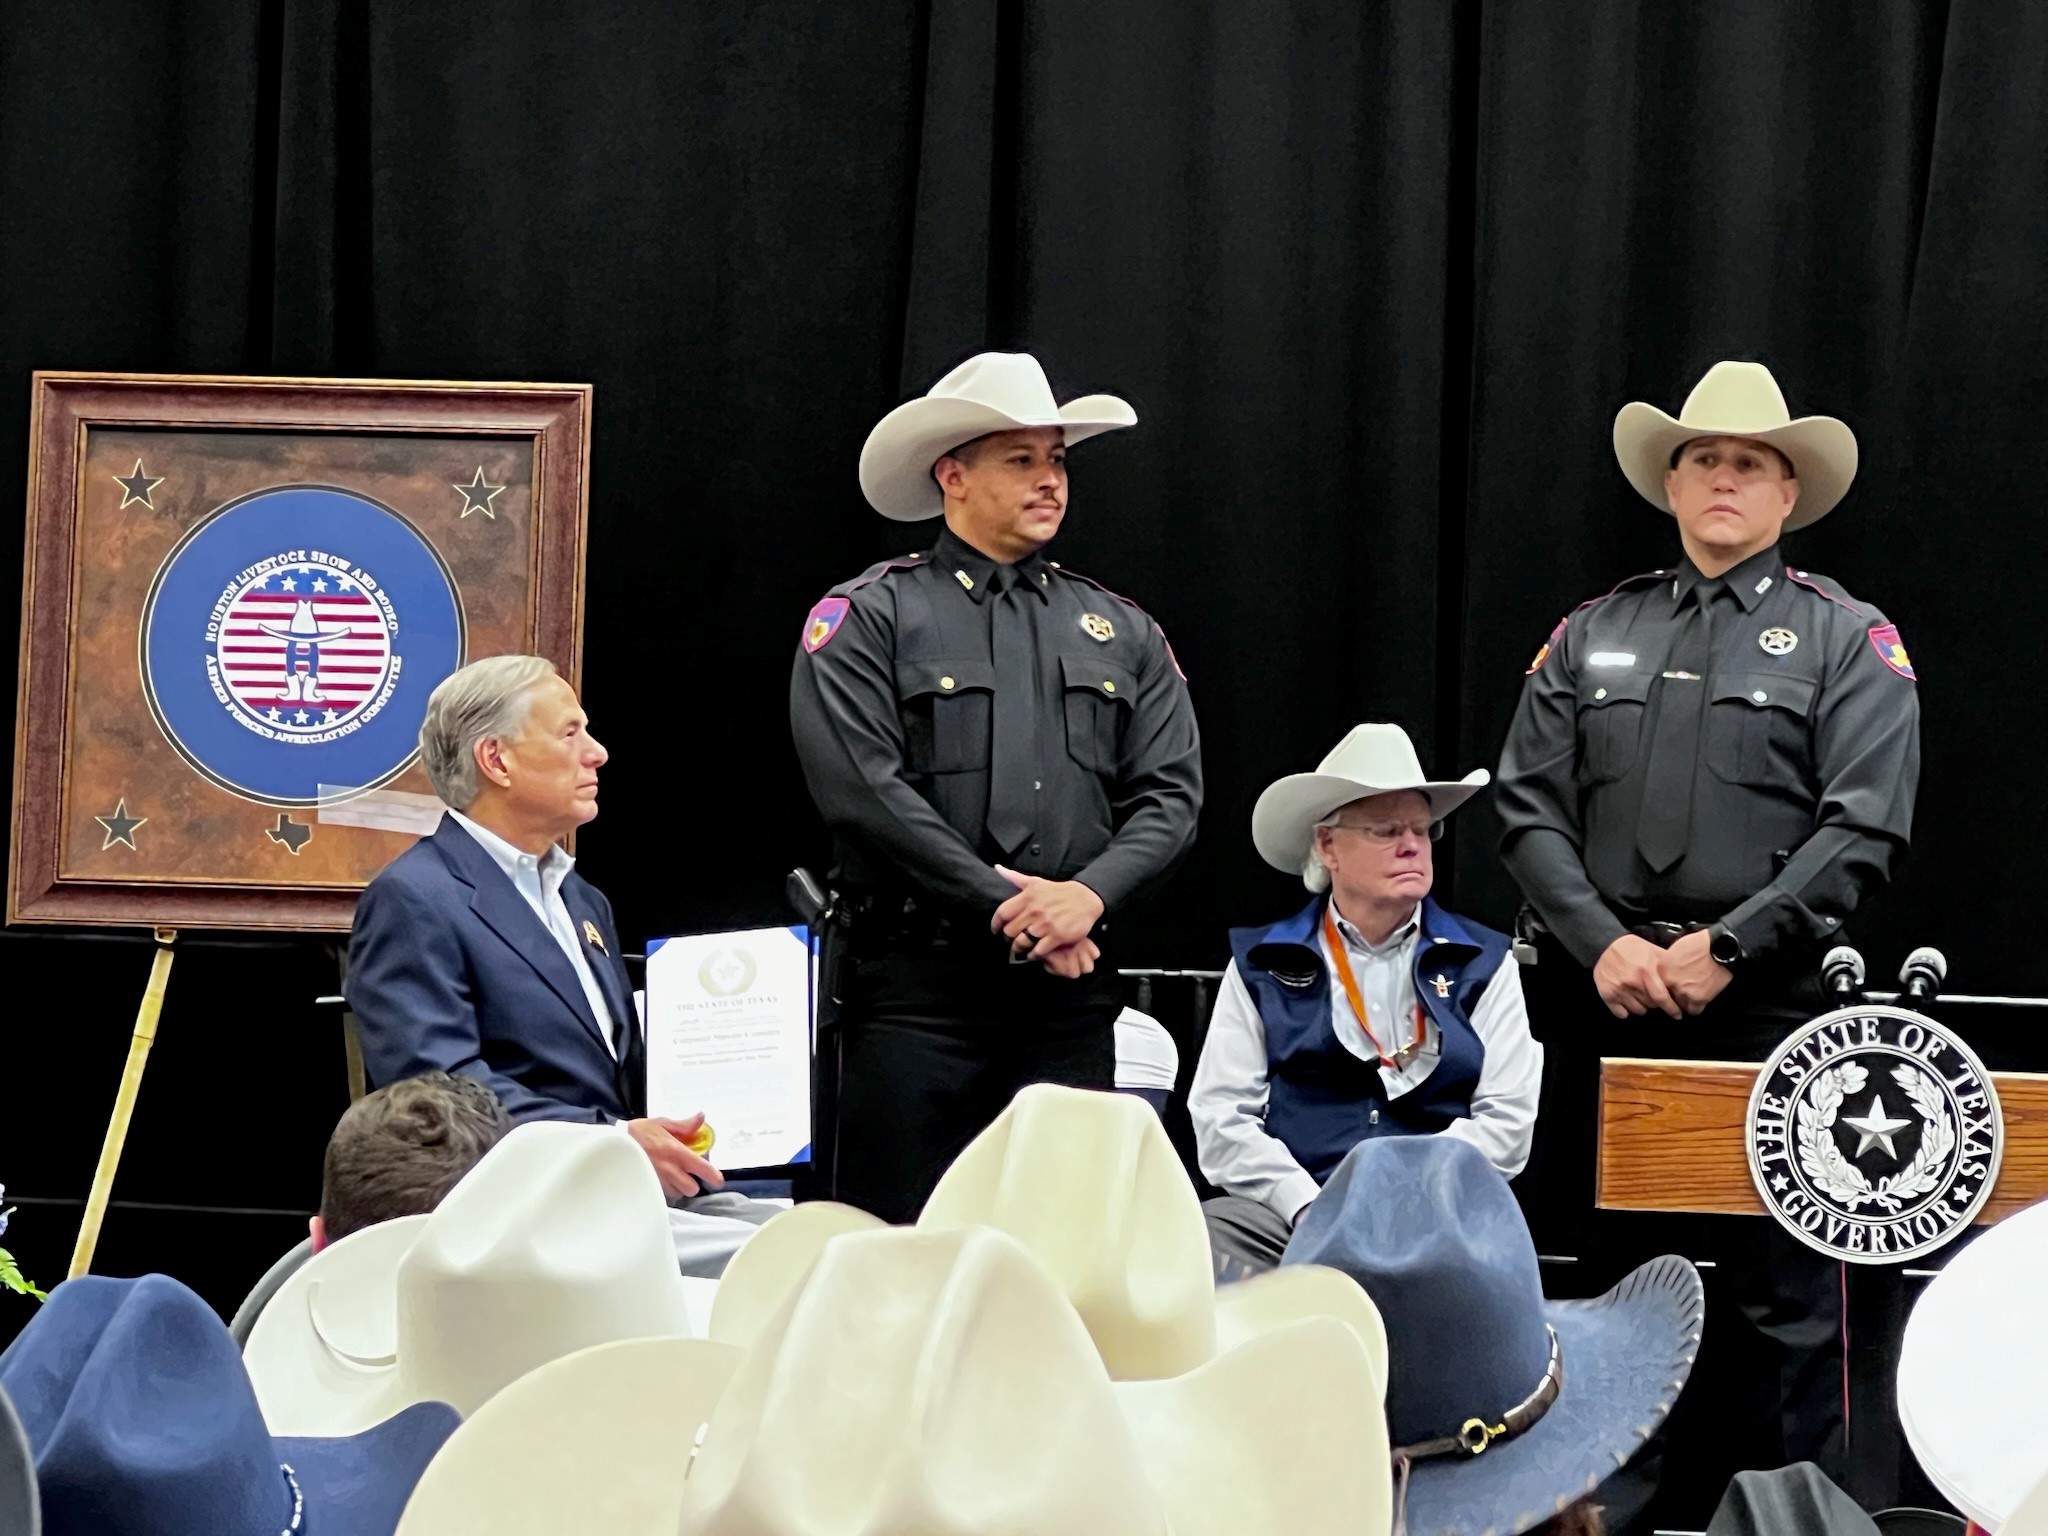 Governor Abbott Honors First Responders At Houston Livestock Show And Rodeo